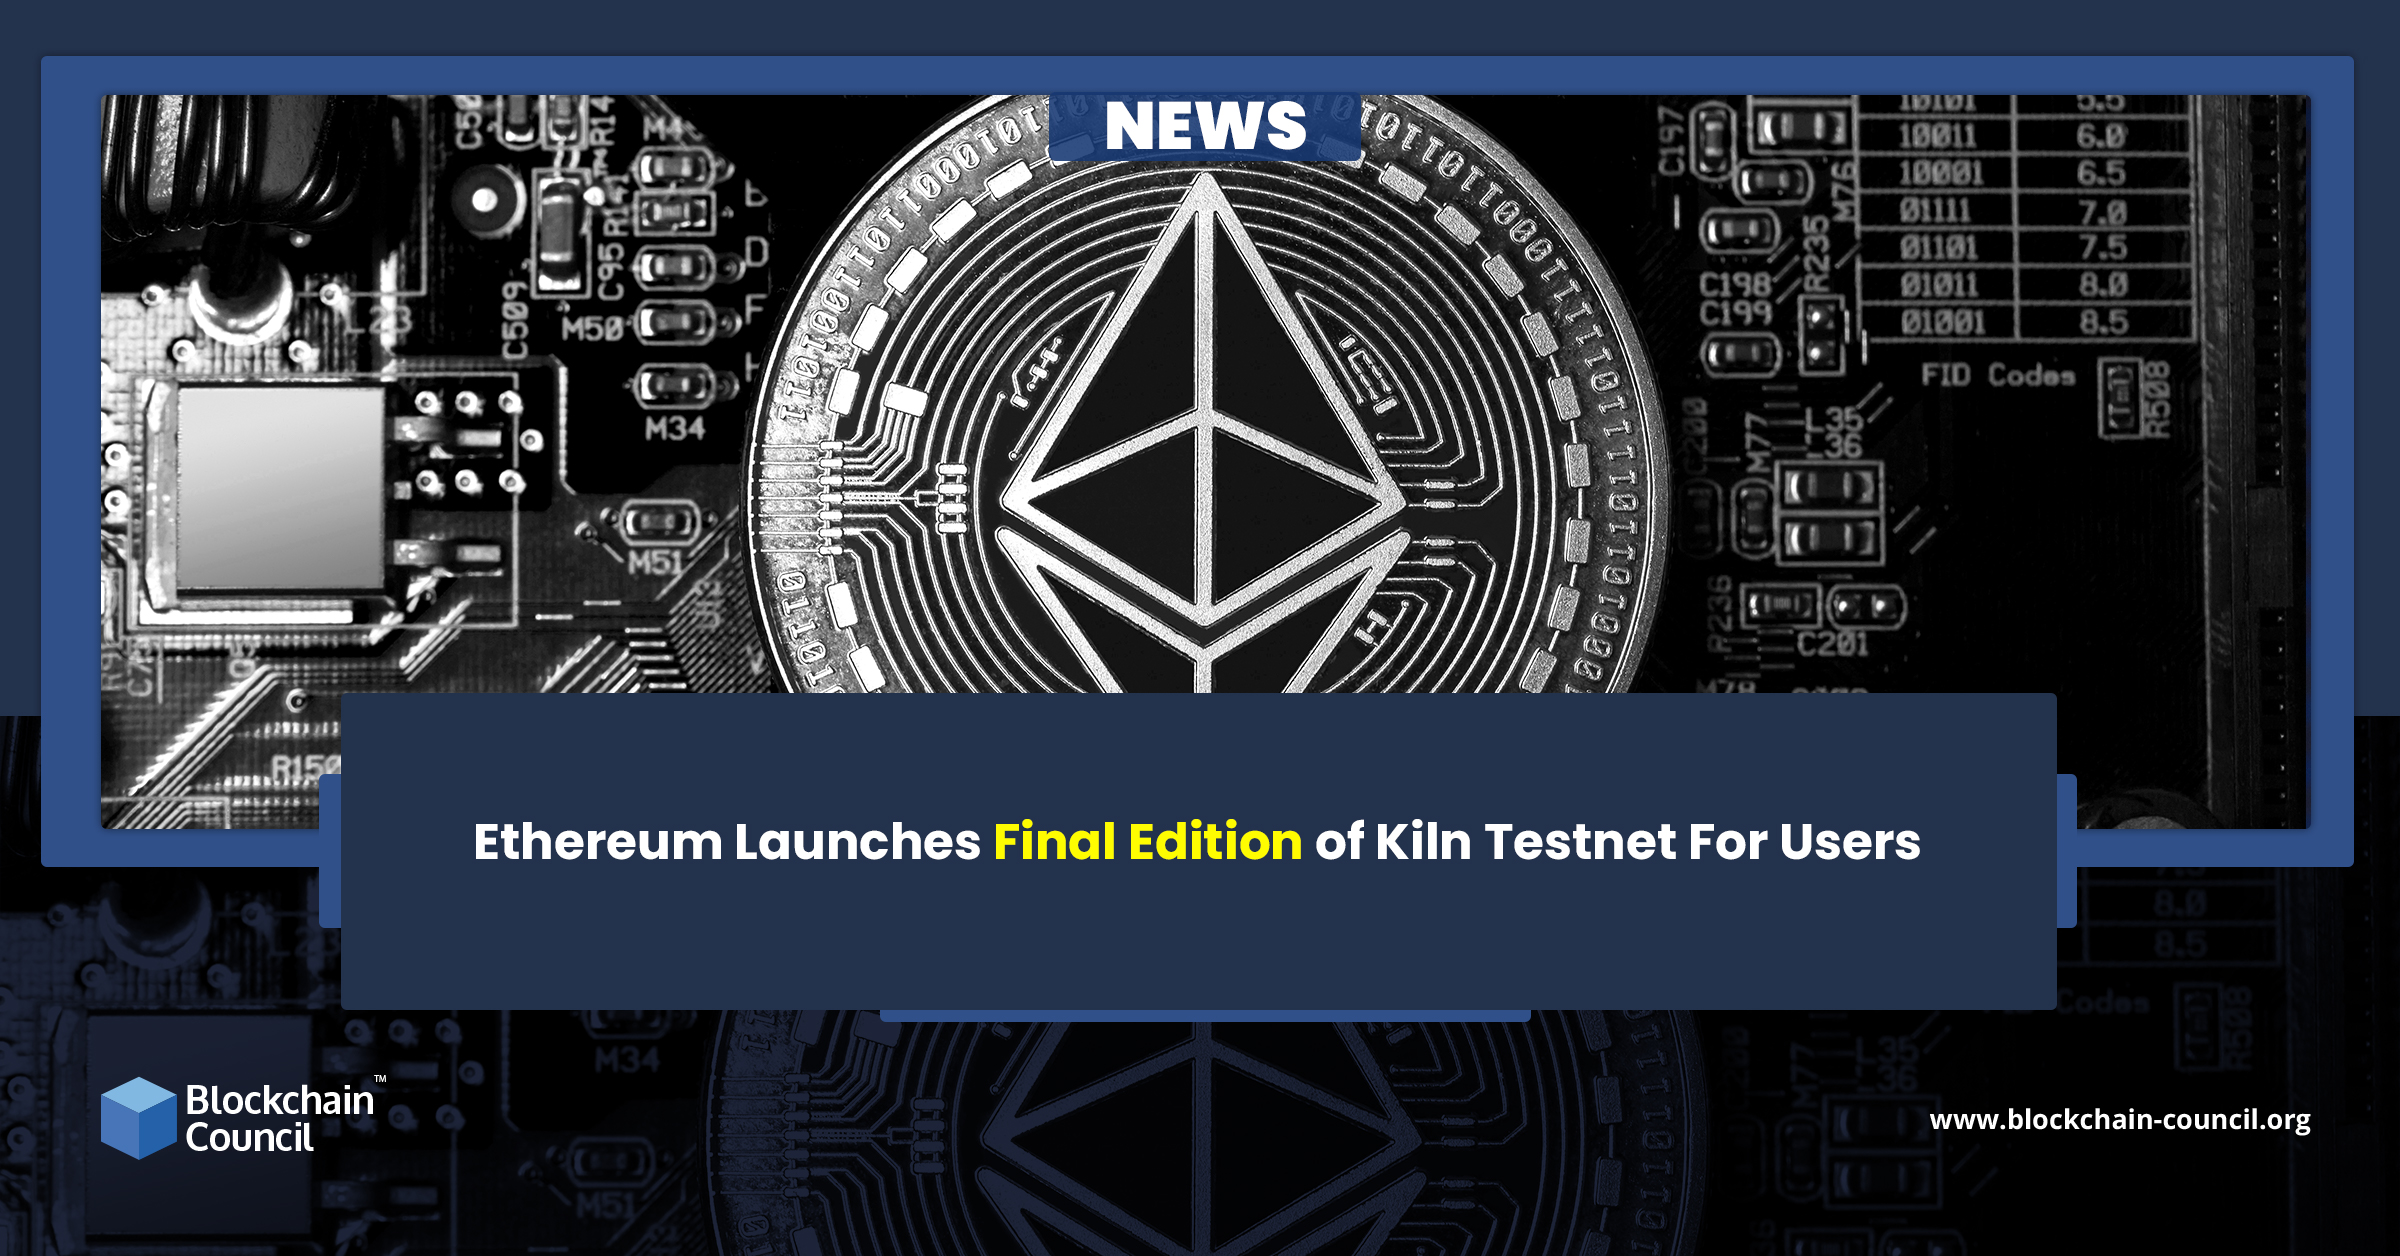 Ethereum Launches Final Edition of Kiln Testnet For Users